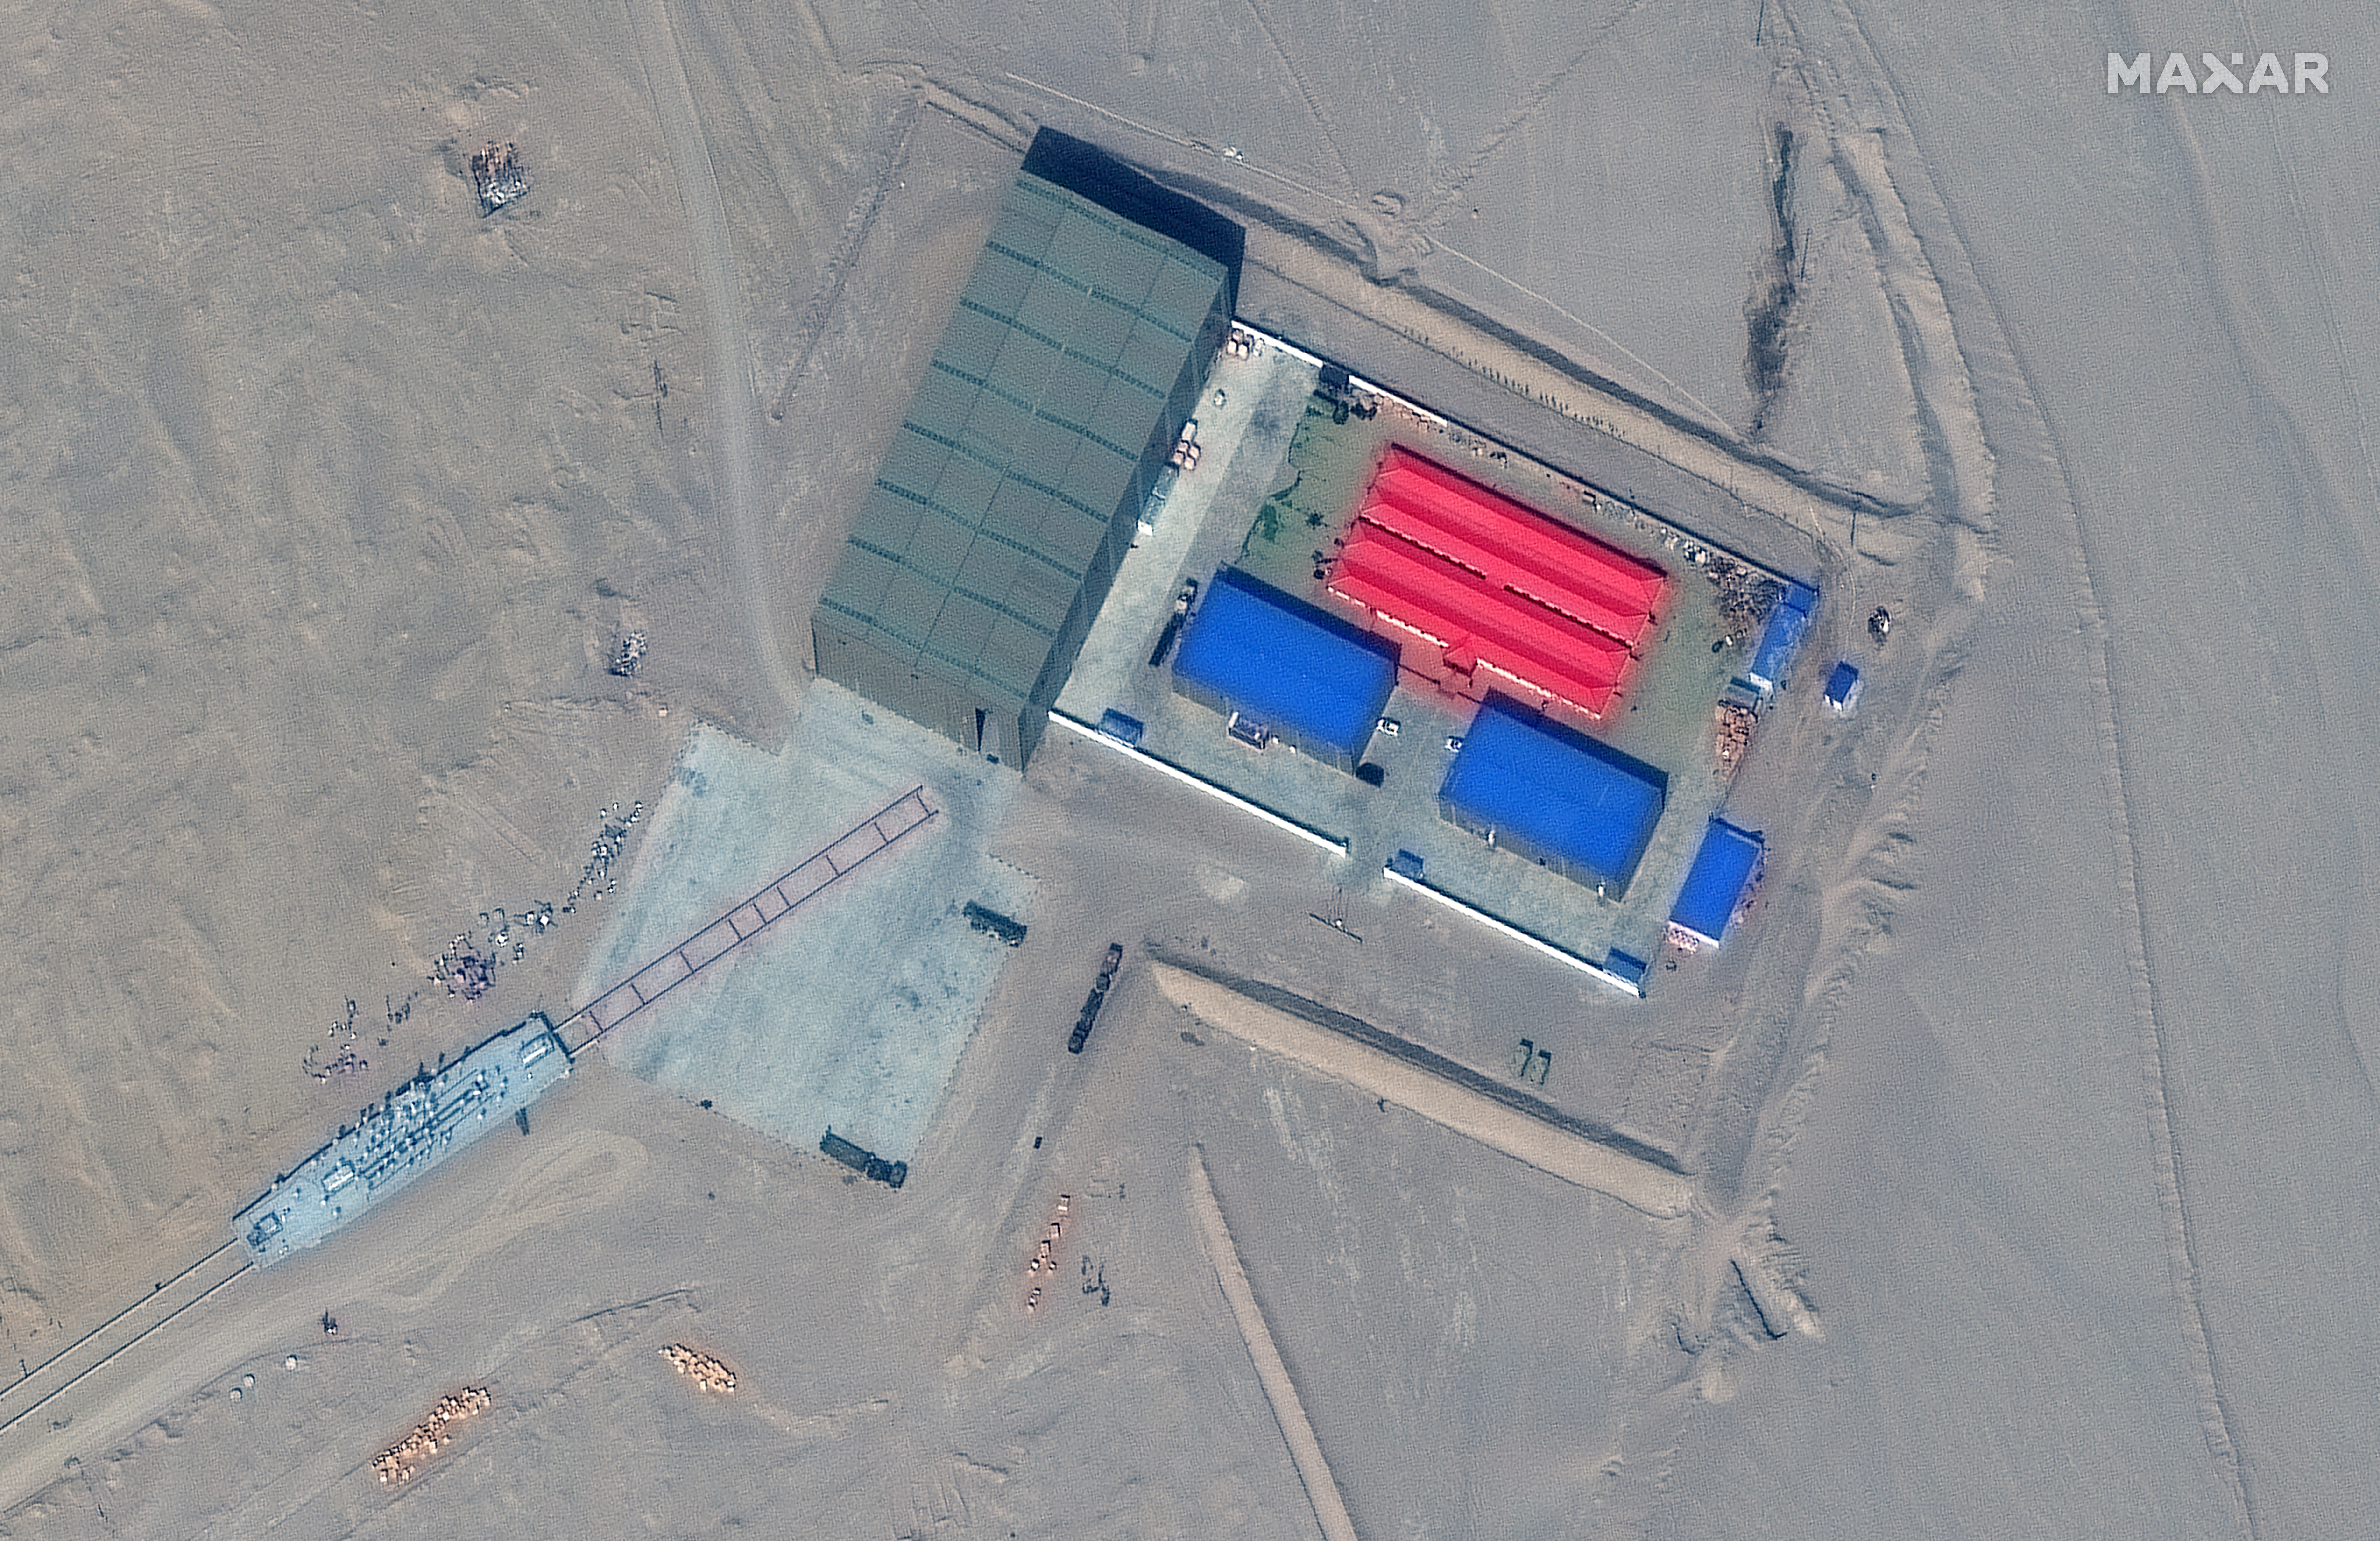 A satellite picture shows a rail terminus and target storage building in Ruoqiang, Xinjiang, China, October 7, 2021. Satellite Image ©2021 Maxar Technologies/Handout via REUTERS